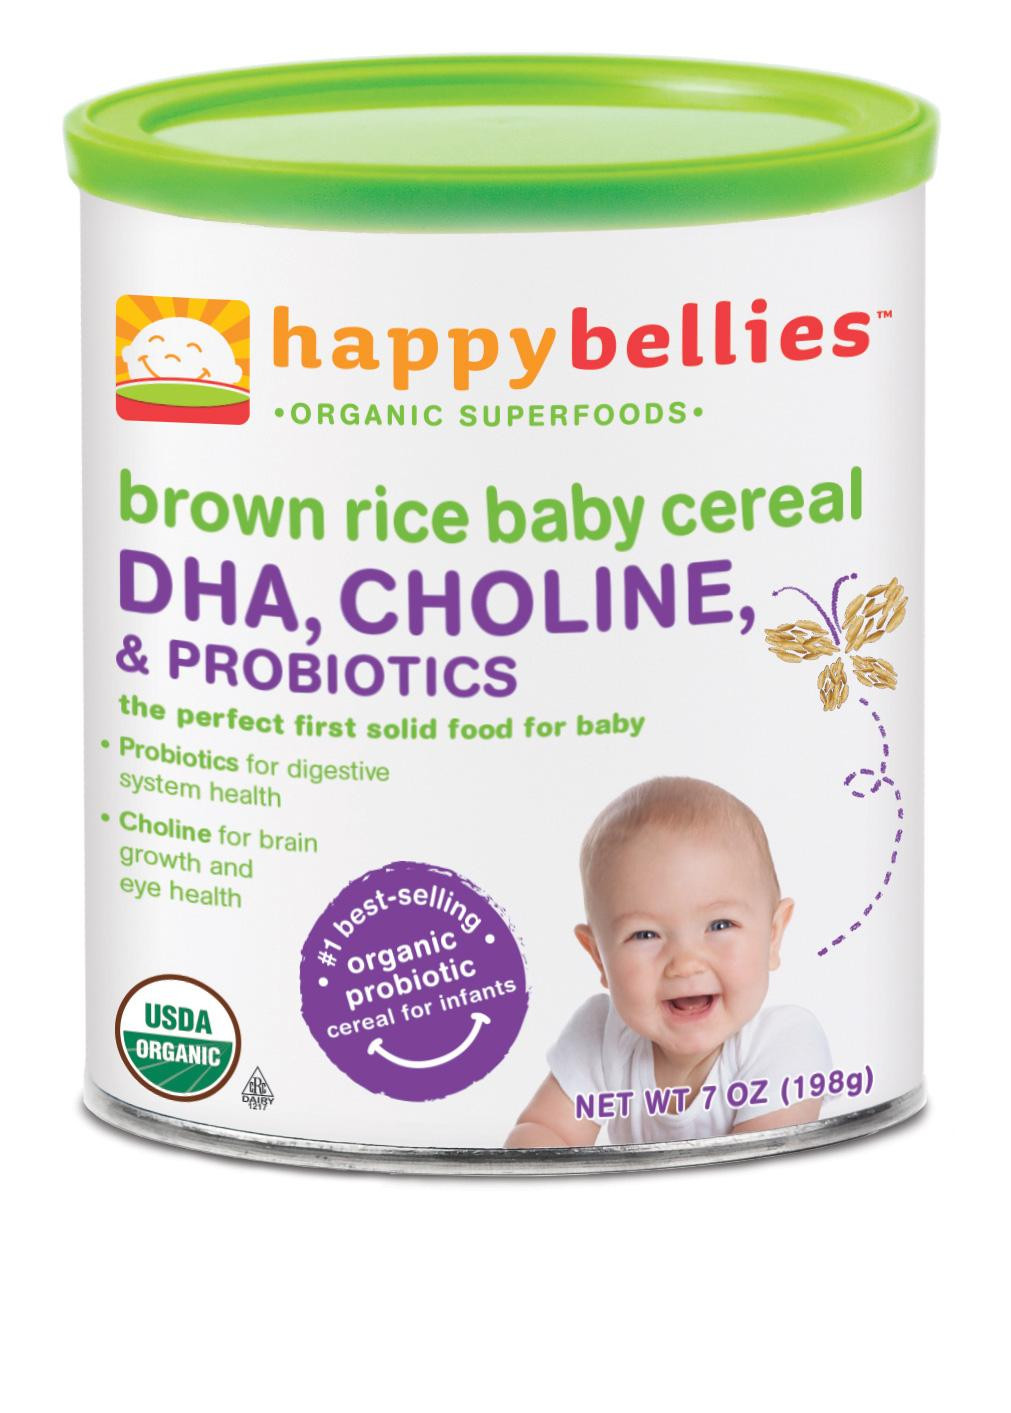 Happy Bellies Organic Brown Rice Cereal
 Amazon Happy Bellies Organic Baby Cereal with DHA